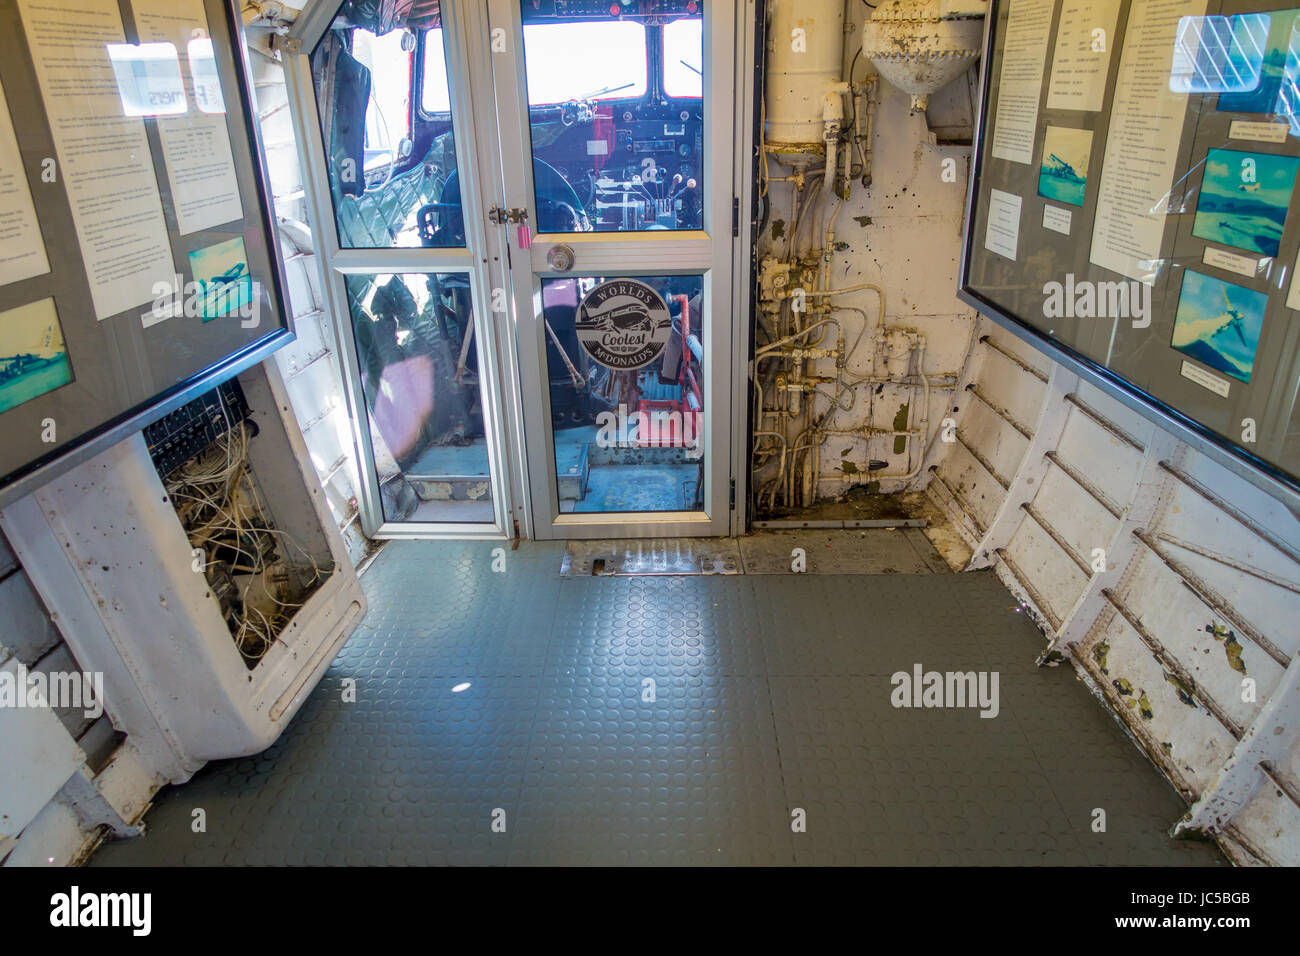 NORTH ISLAND, NEW ZEALAND- MAY 18, 2017: Interior view of the Cockpit from the amazing DC3 plane as part of the McDonald's located at Taupo,New Zealan Stock Photo